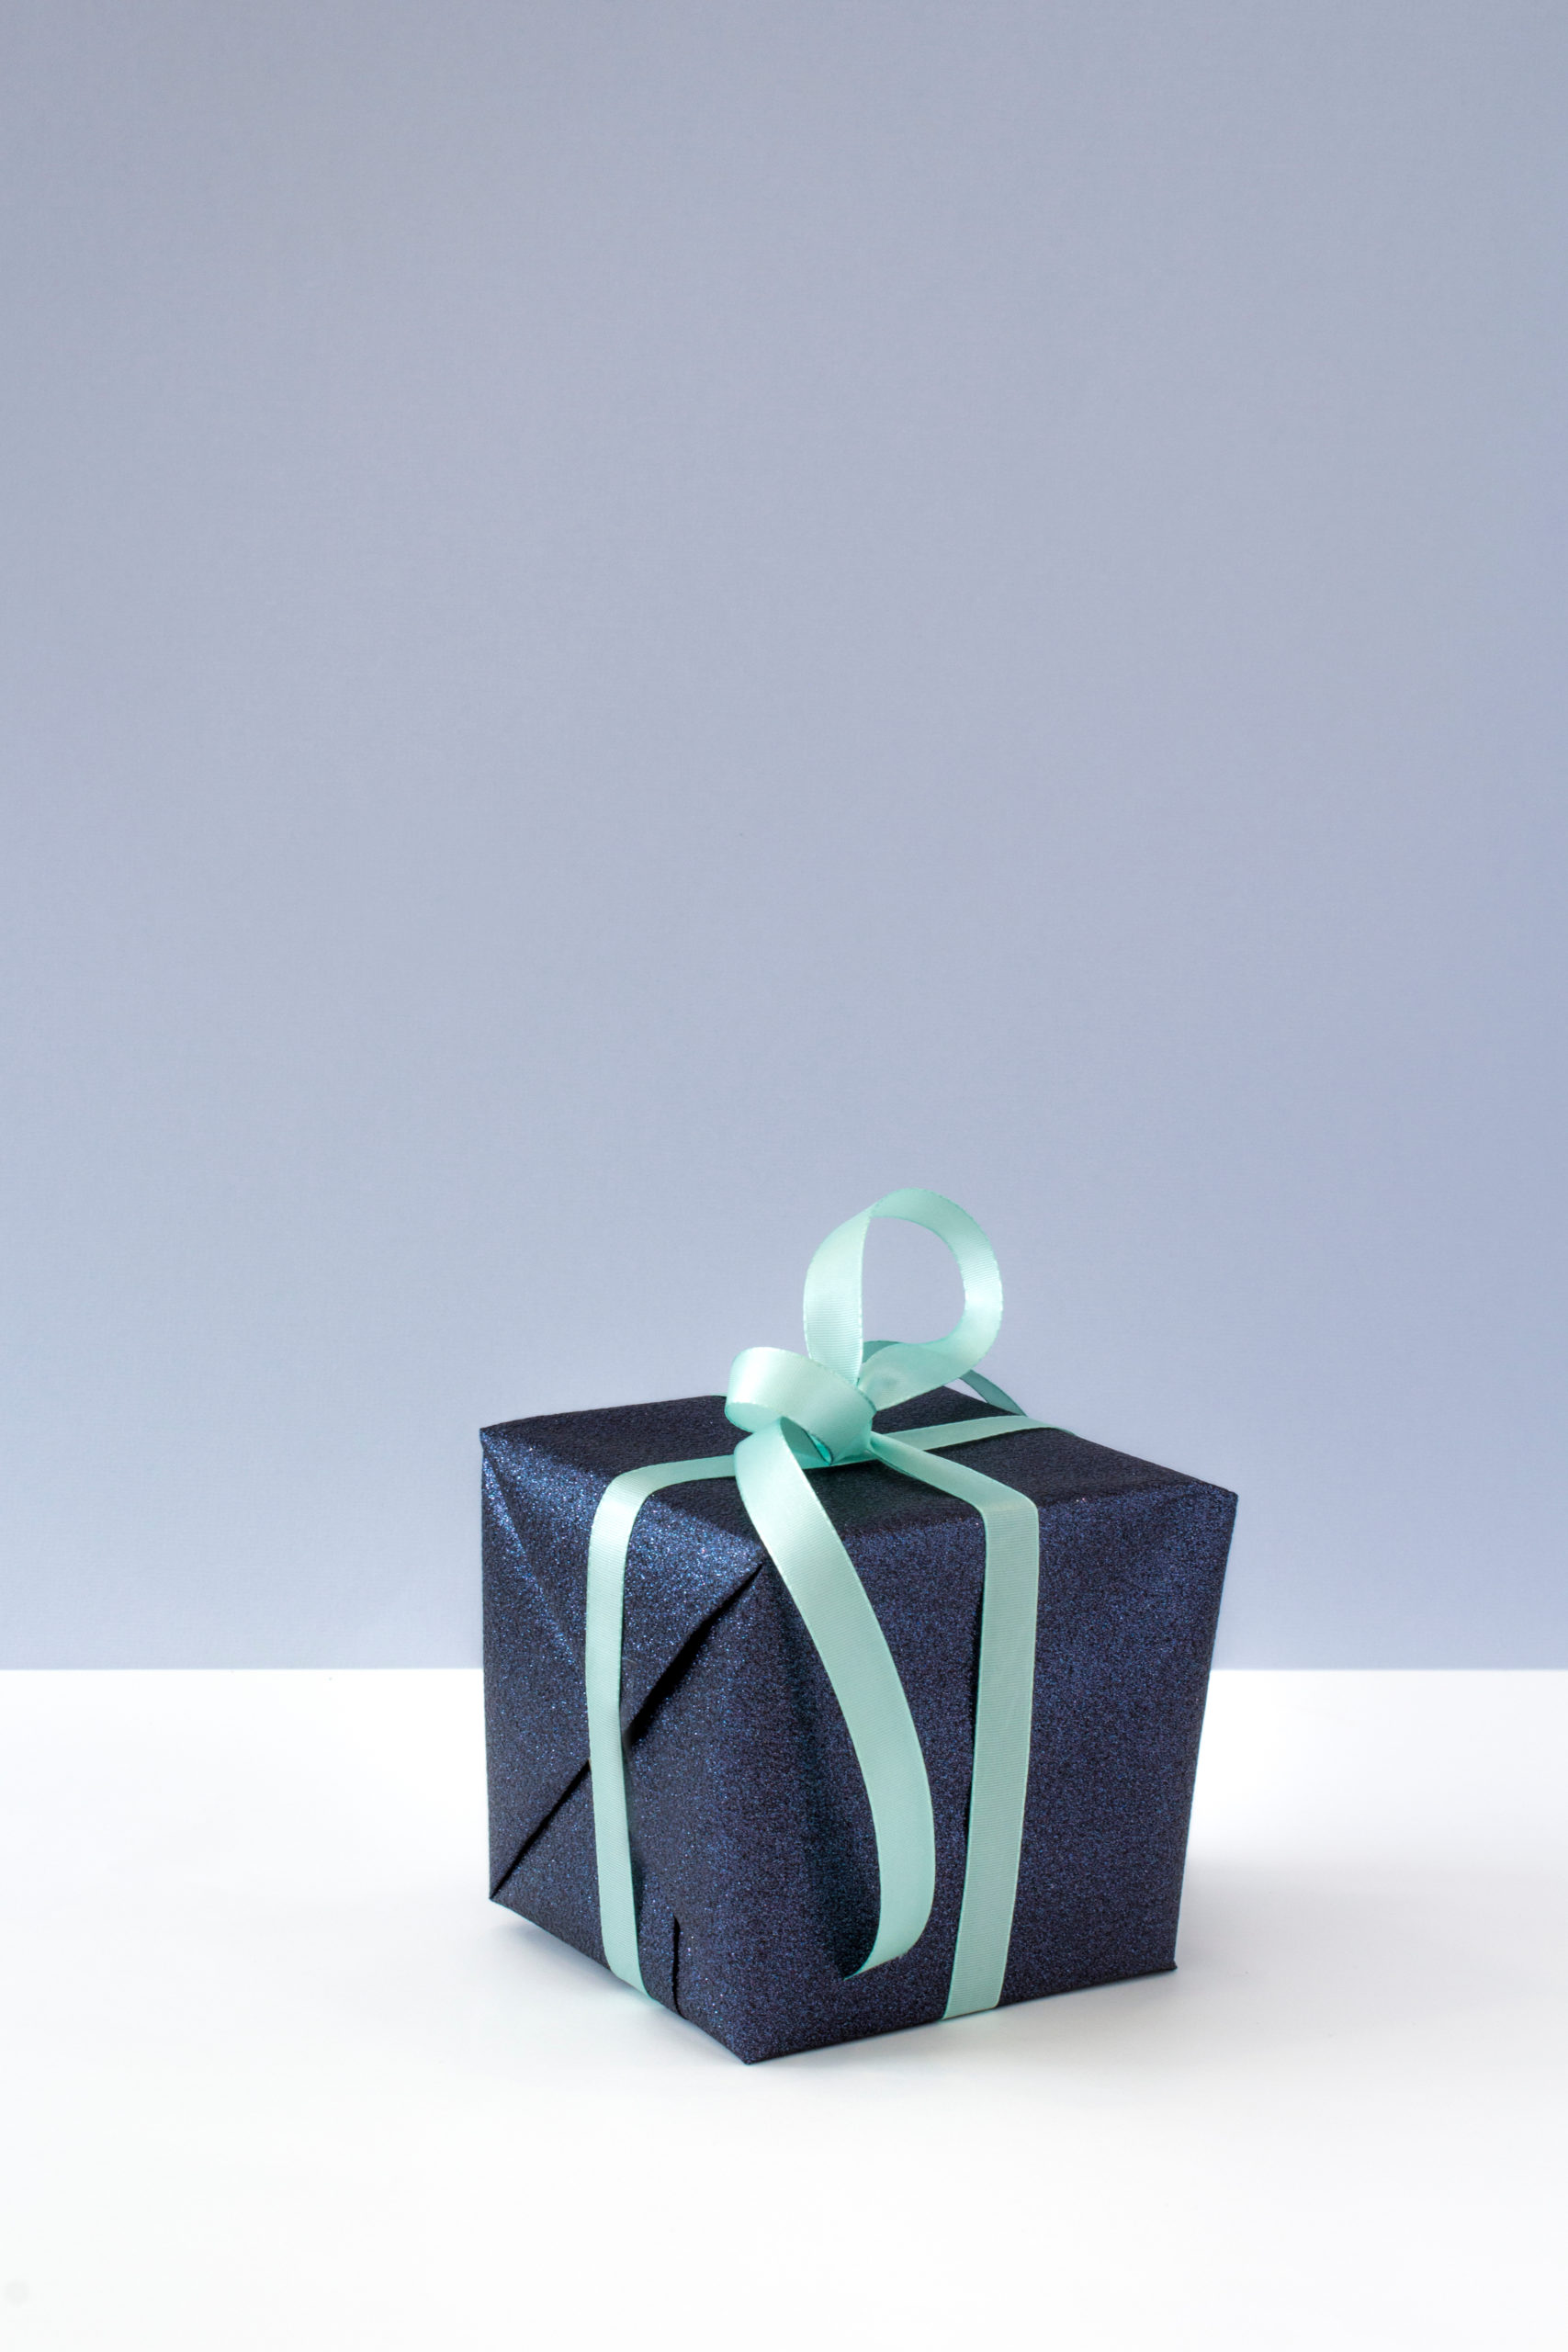 https://suehawkes.com/wp-content/uploads/2020/08/Canva-Blue-Gift-Box-With-Blue-Ribbon-scaled.jpg